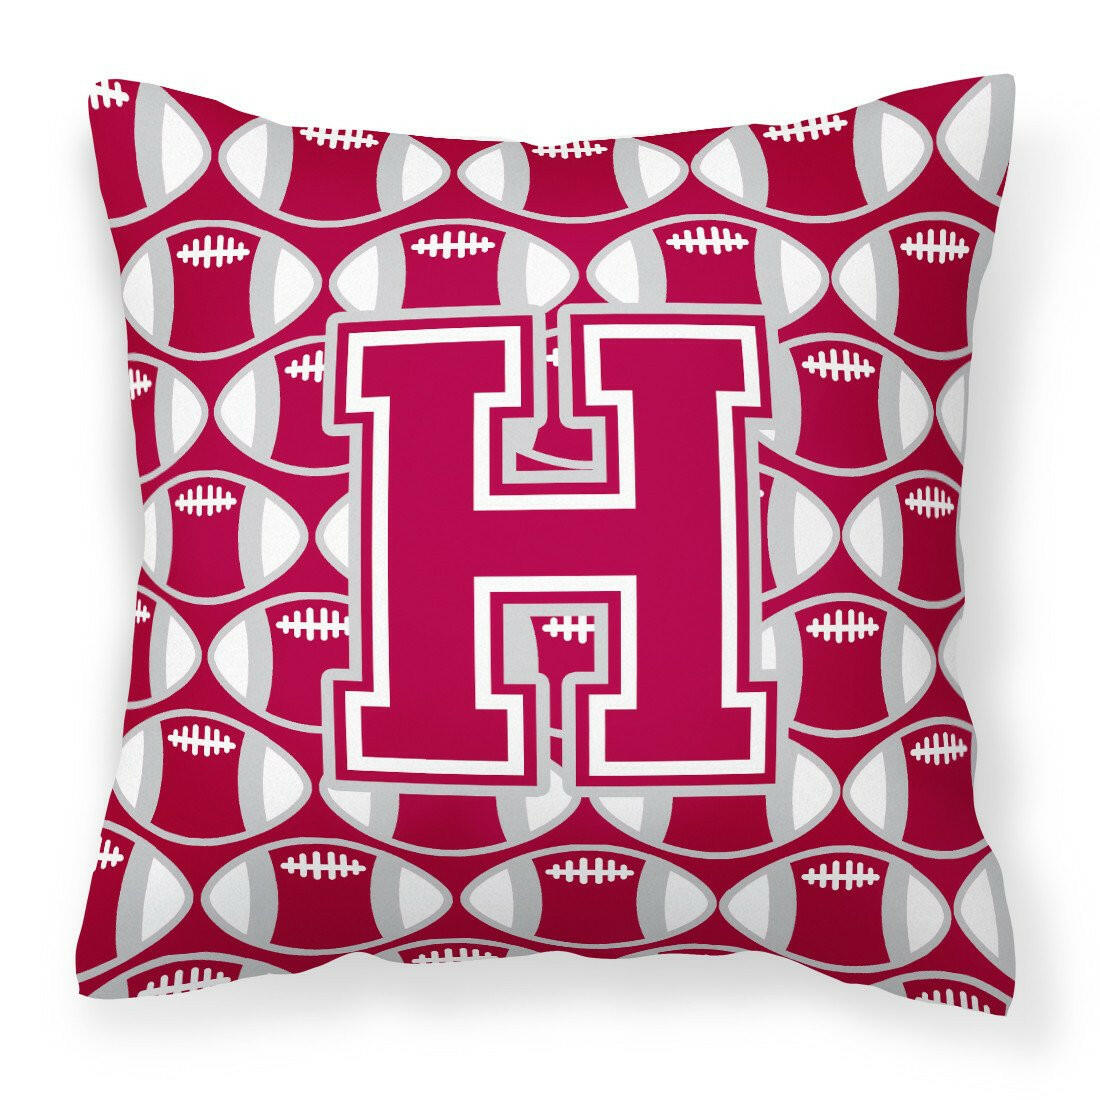 Letter H Football Crimson, grey and white Fabric Decorative Pillow CJ1065-HPW1414 by Caroline's Treasures